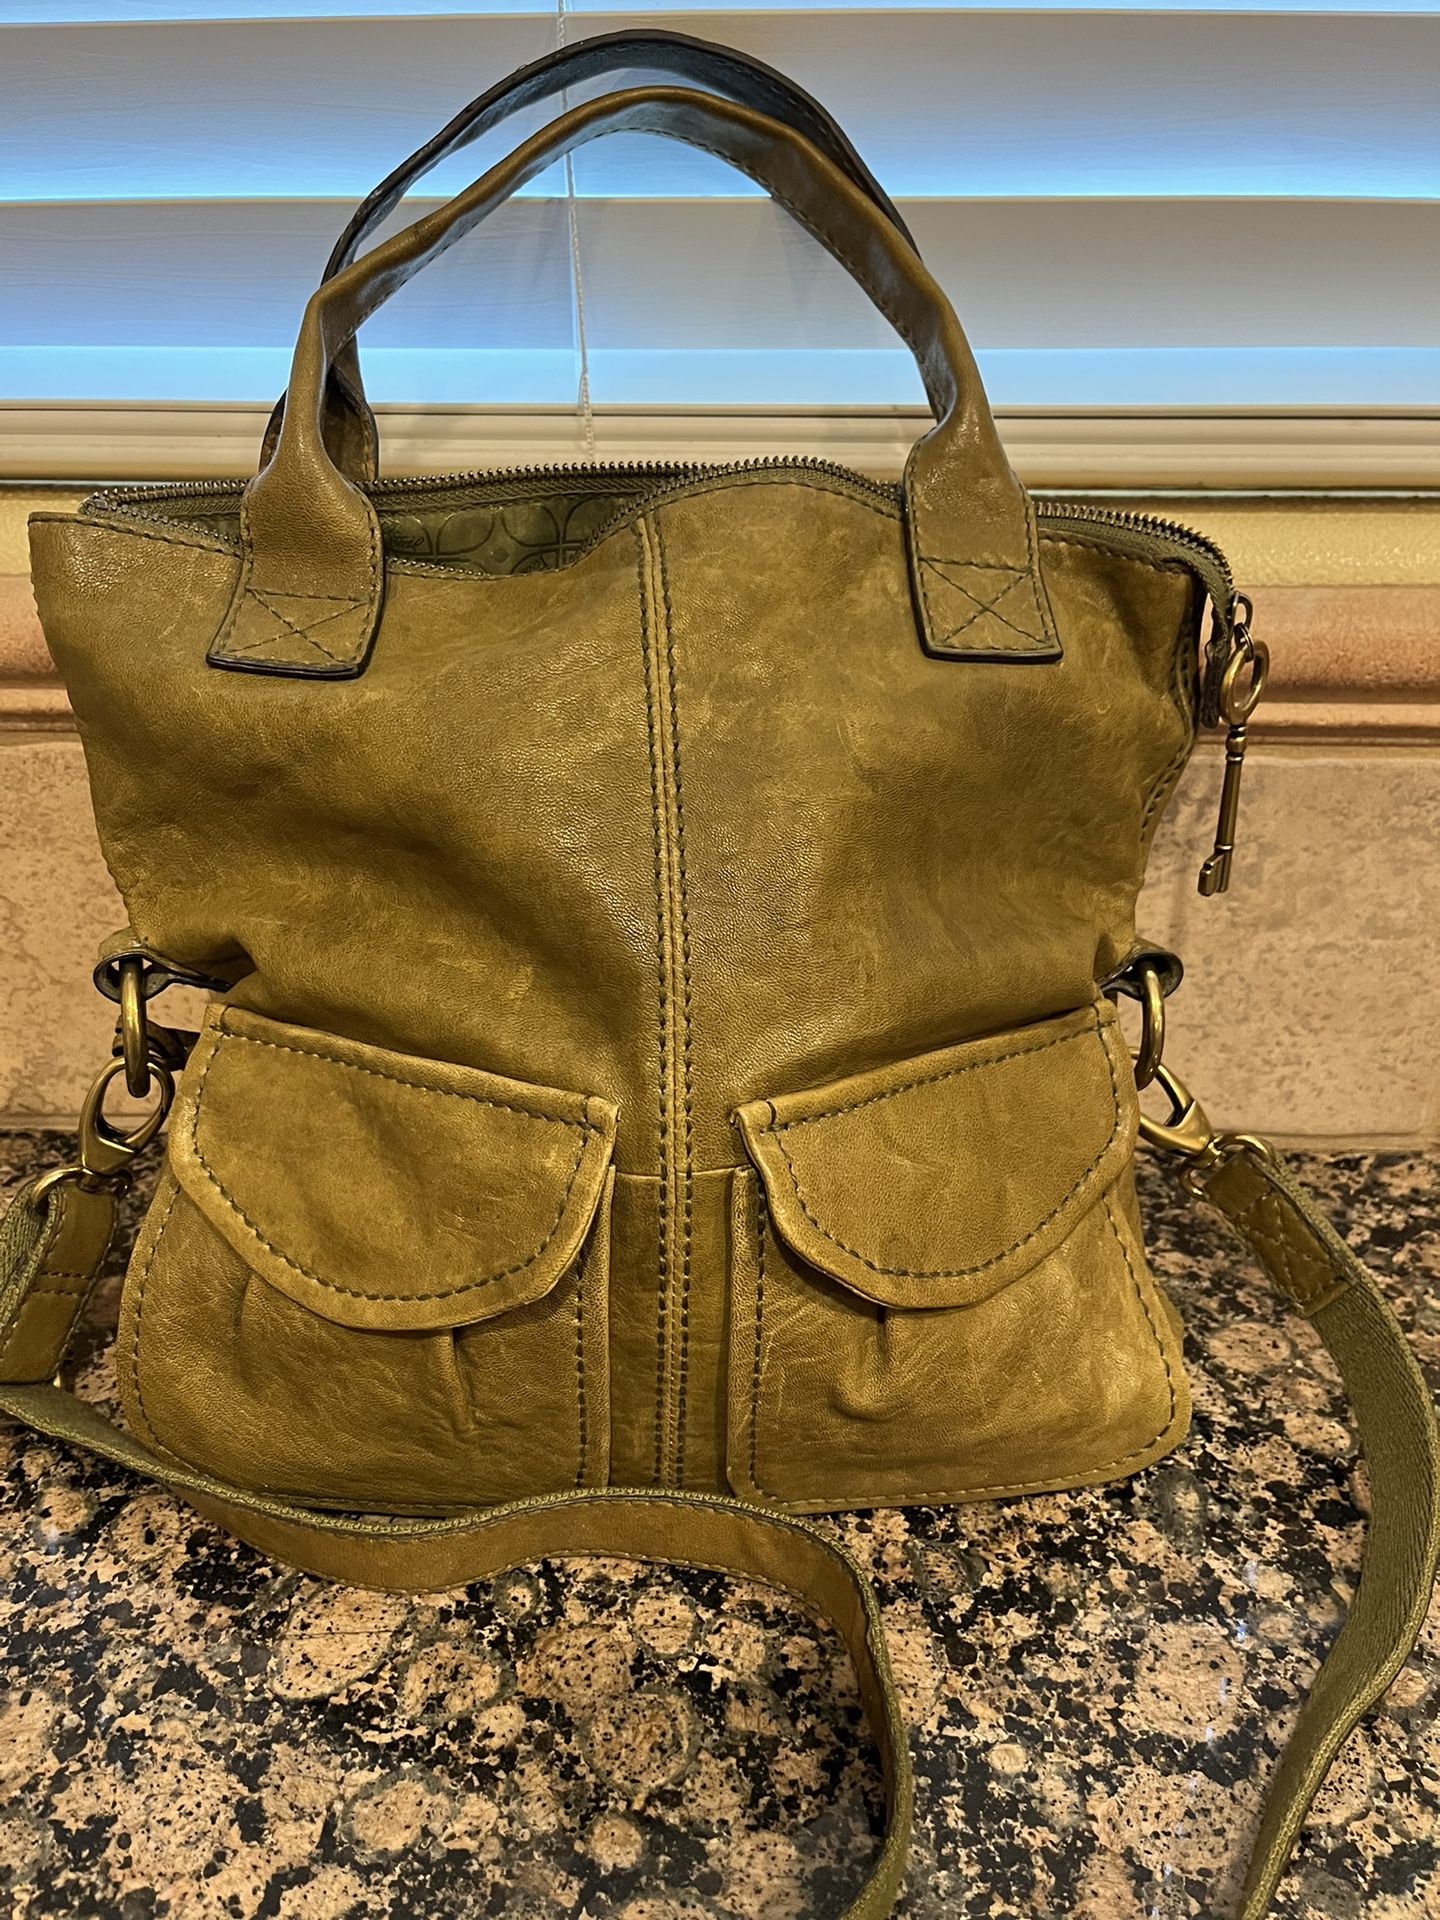 Trendy, Clean Second Hand Bags in Excellent Condition 